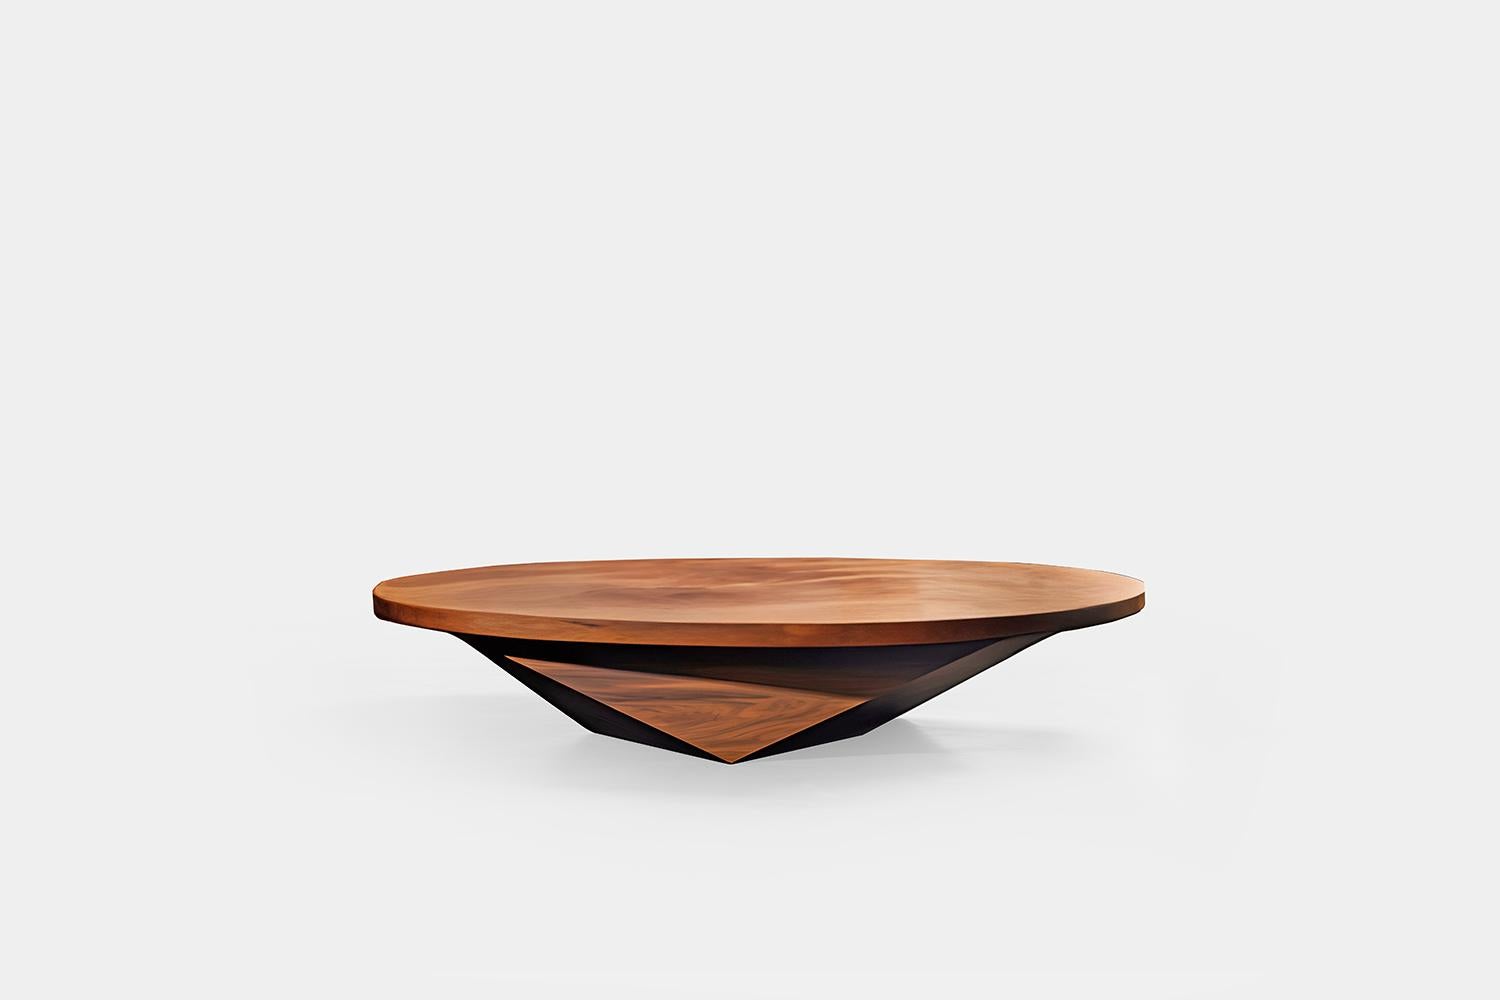 Mexican Sturdy Base Solace 21: Elegant Design in Solid Wood with Geometric Elements For Sale